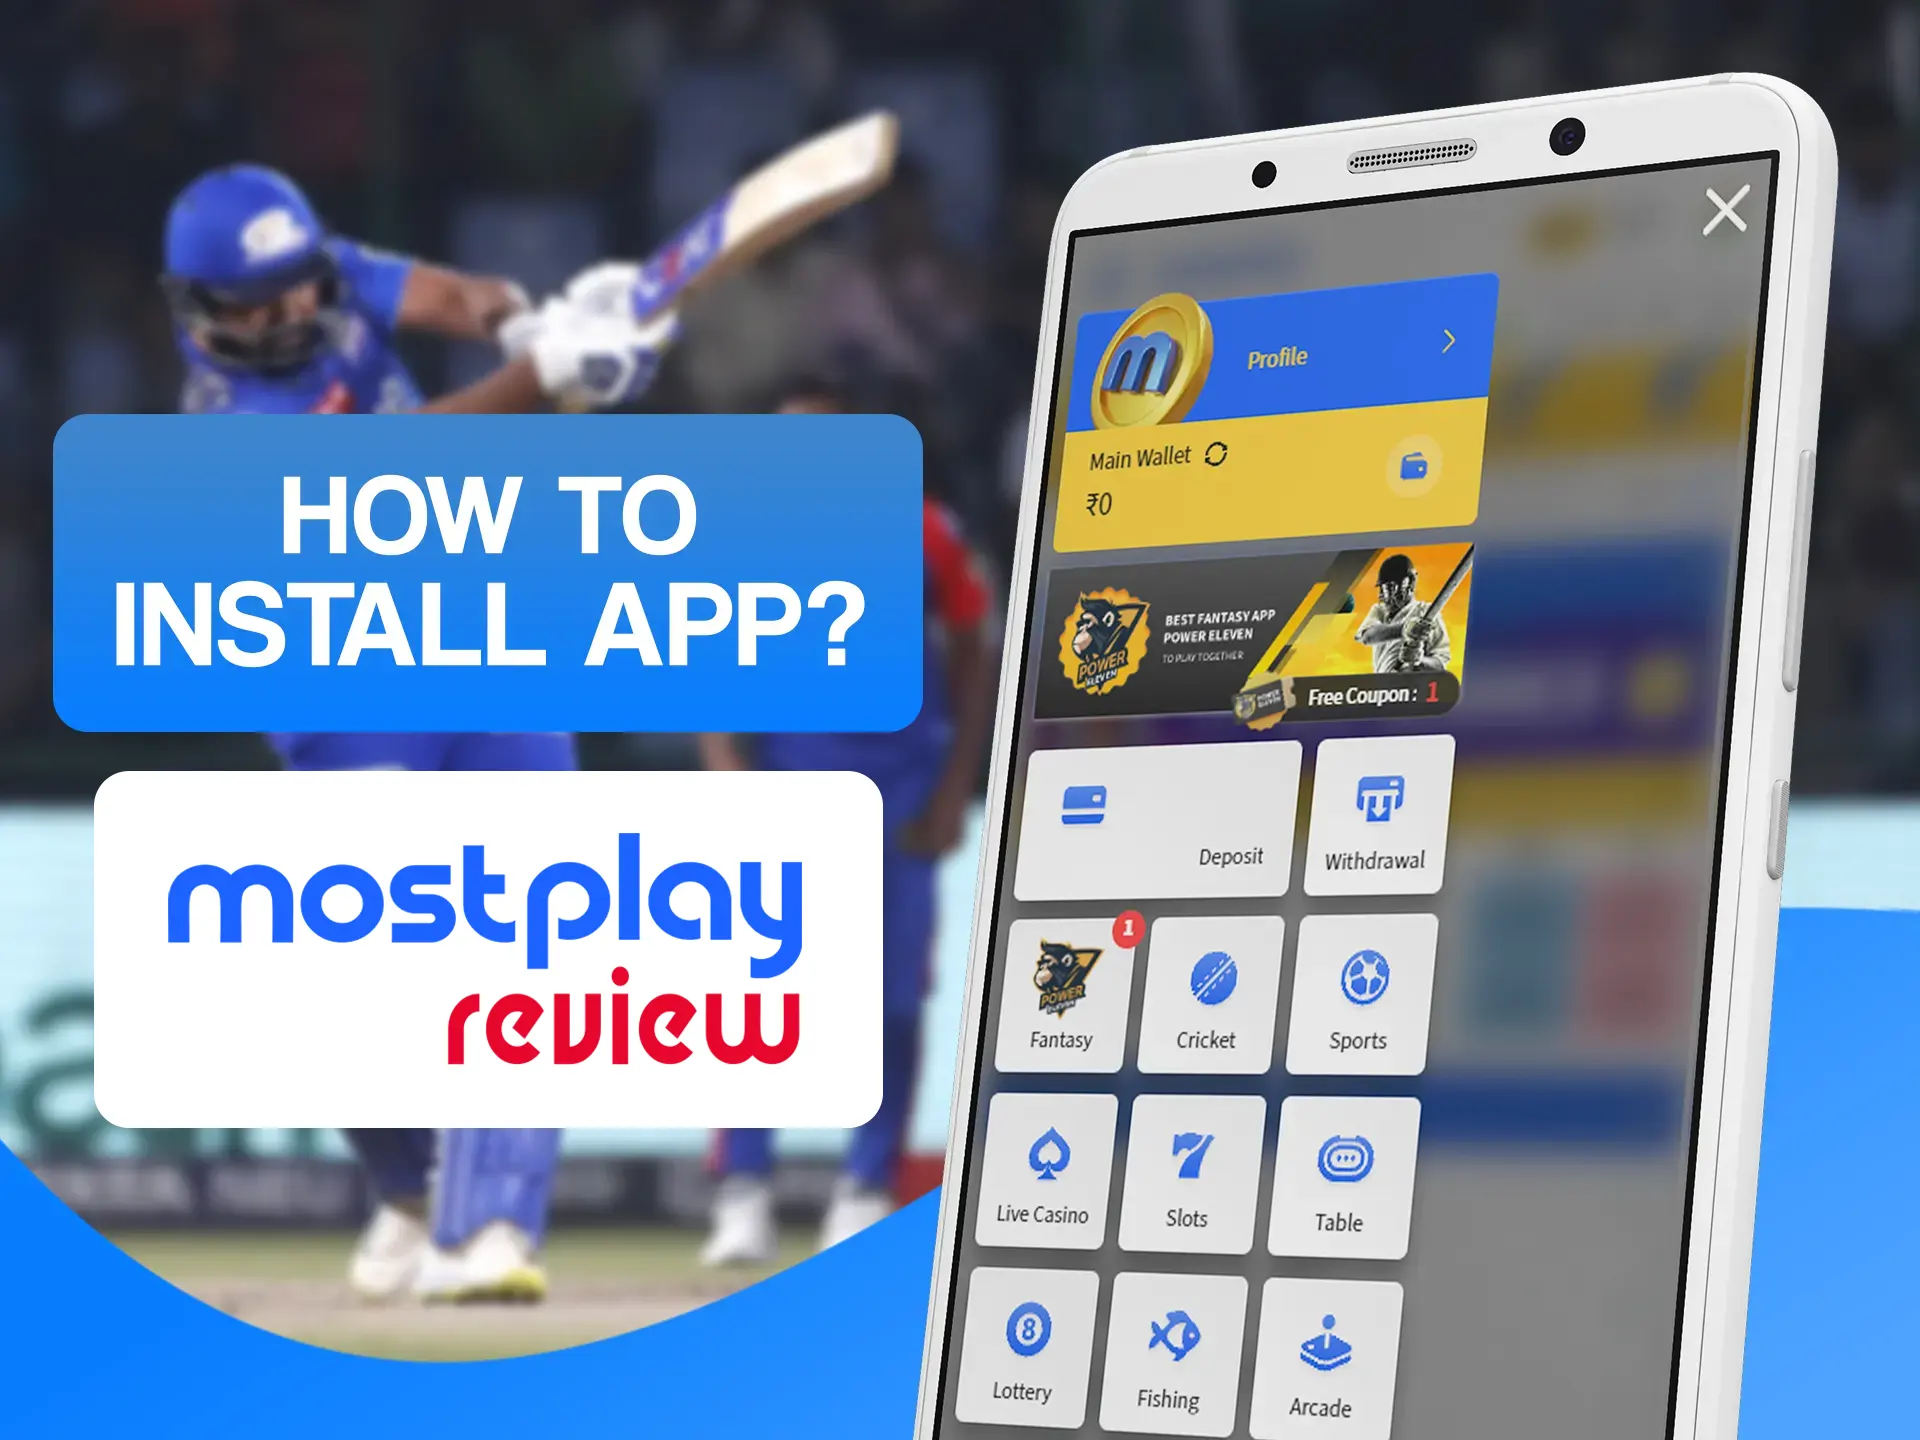 Install the app after downloading it from the official Mostplay page.